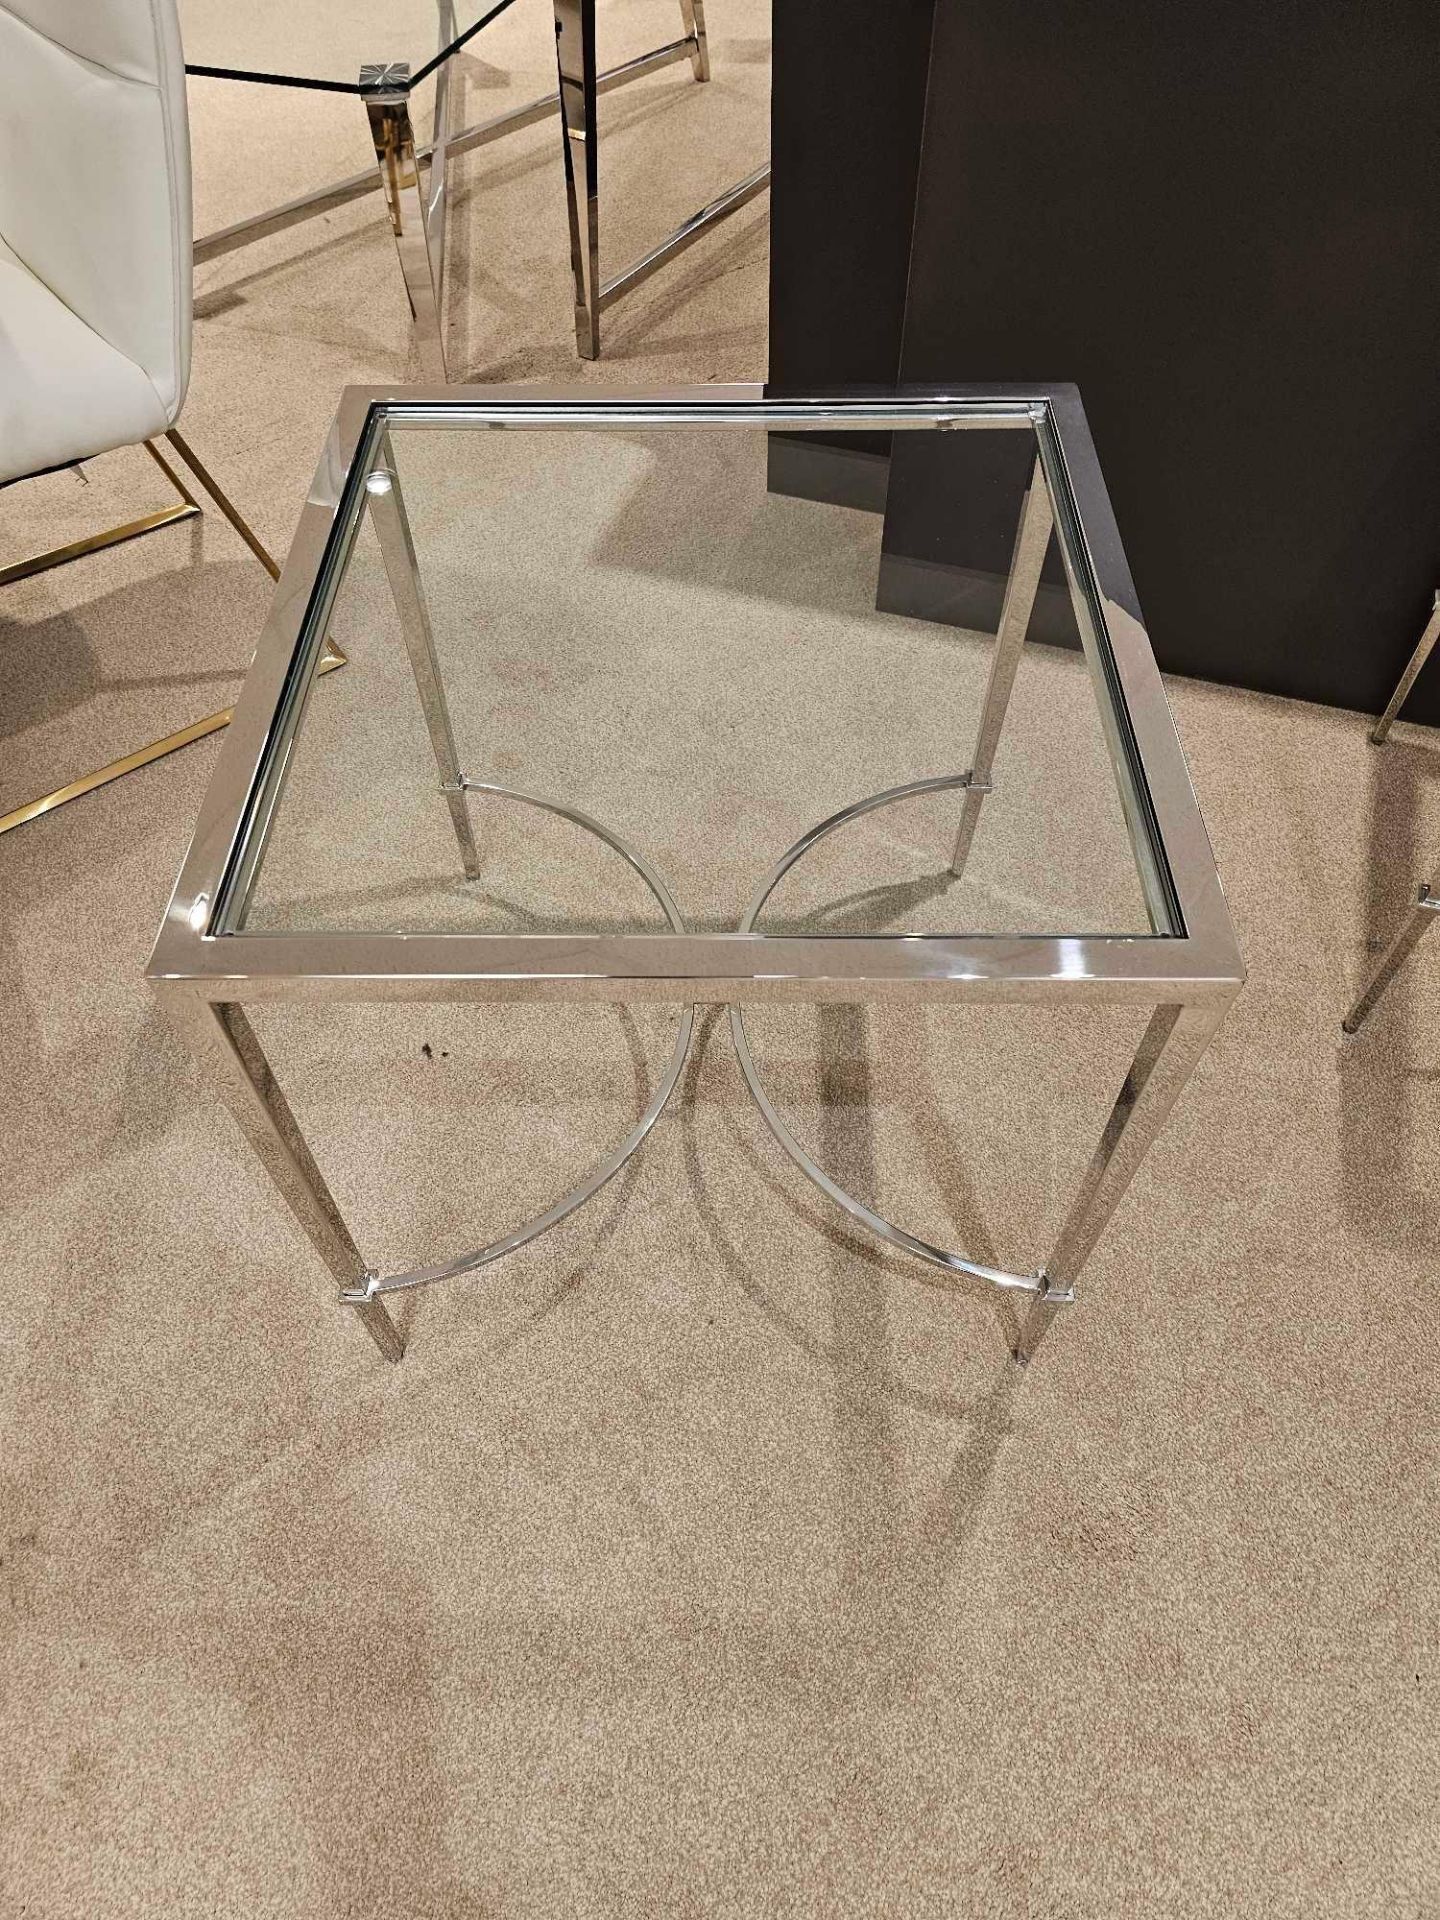 Tokyo Lamp Table by Kesterport The Tokyo lamp table with its clear glass top and a refined tapered - Image 3 of 5